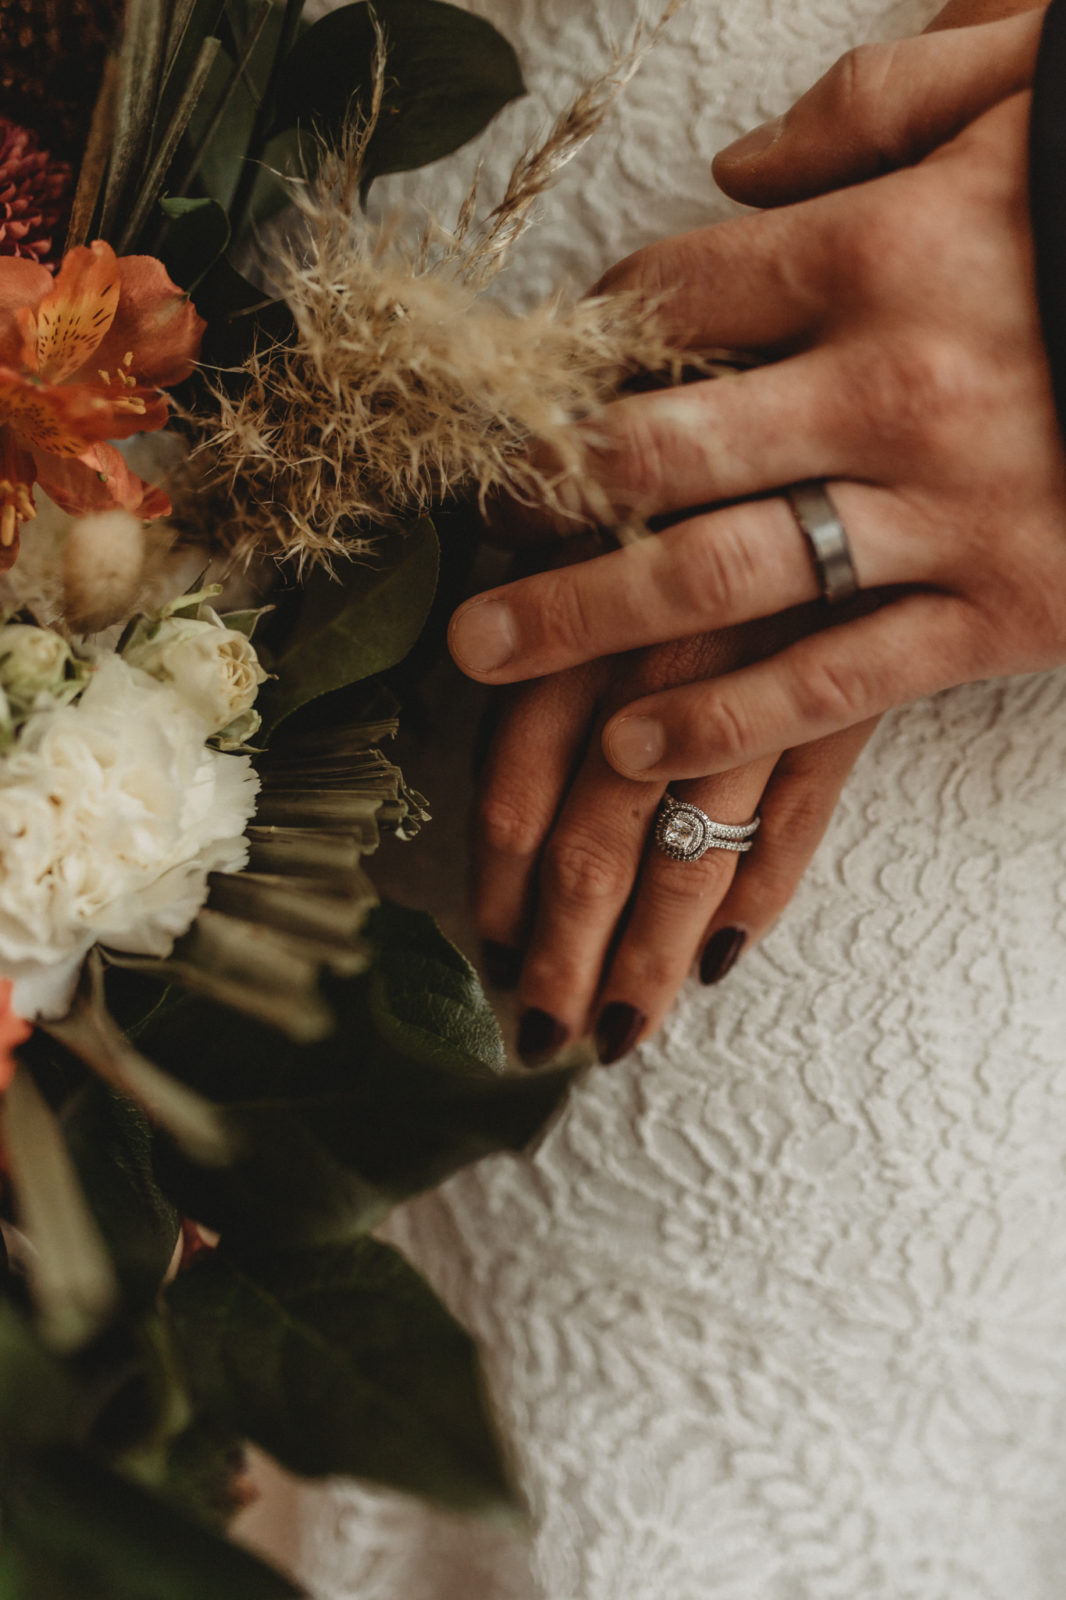 Bride and groom's hand together with a dried floral wedding bouquet in the foreground